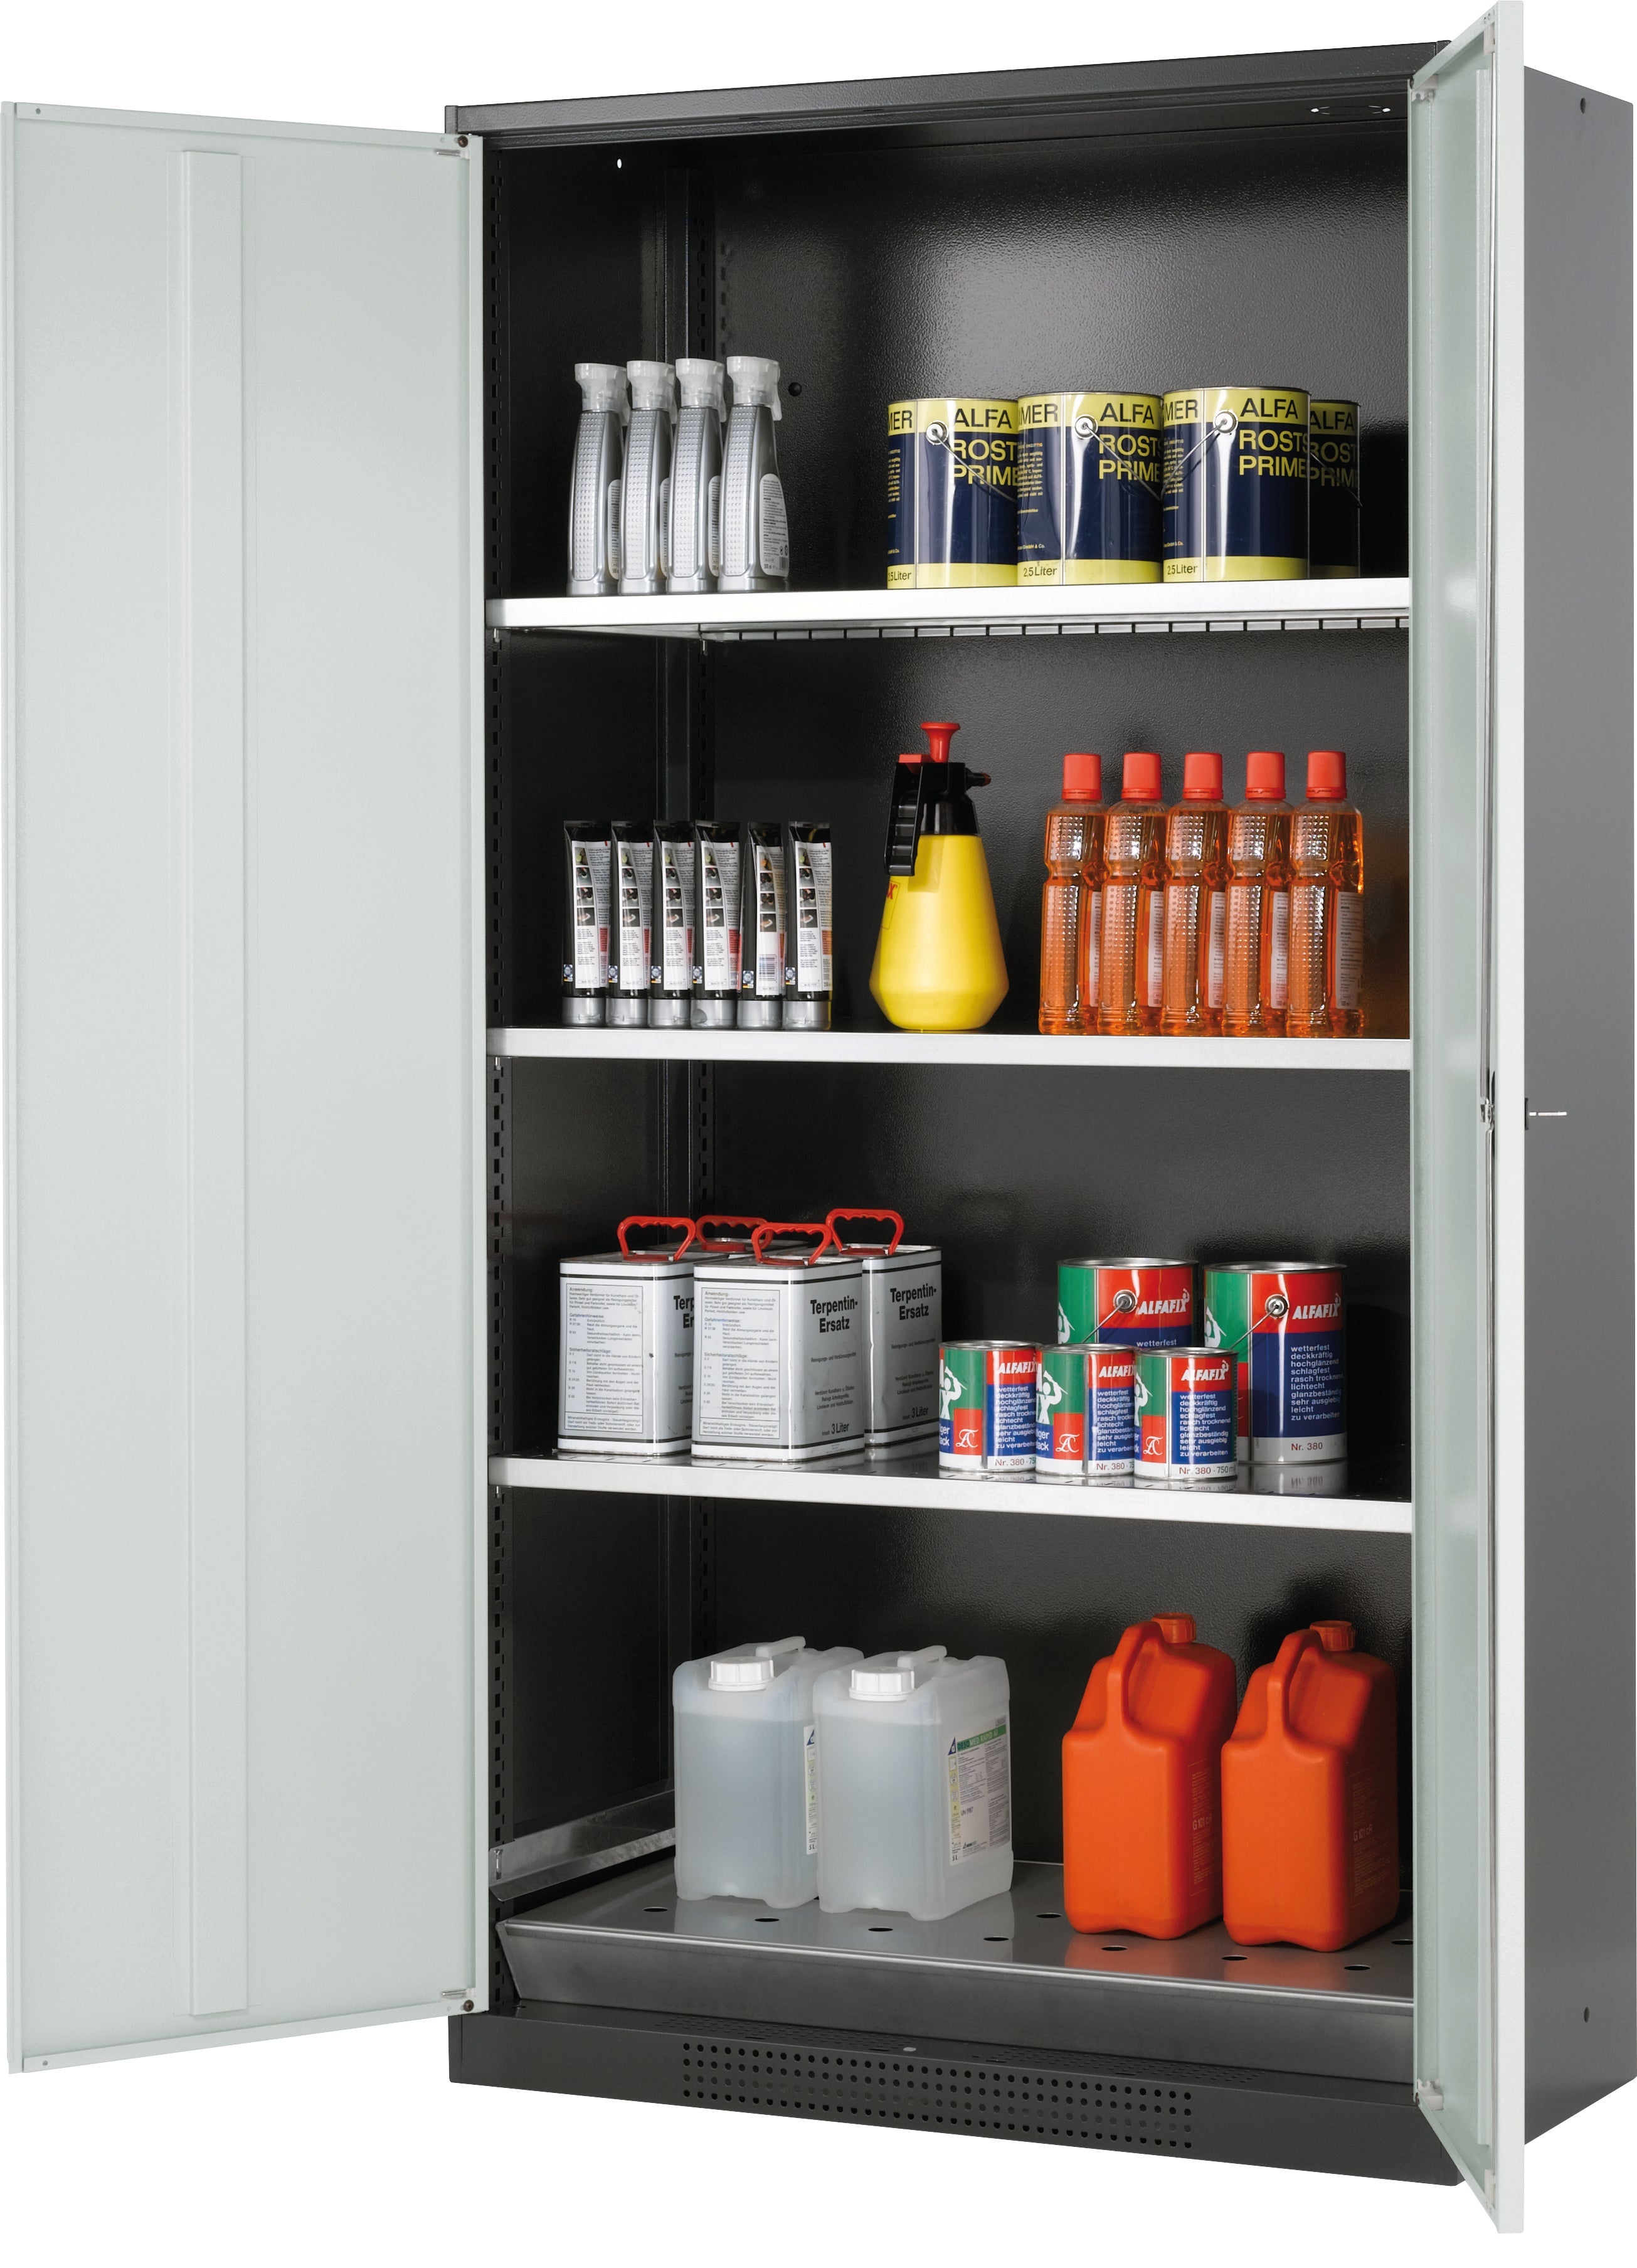 Chemical cabinet CS-CLASSIC model CS.195.105 in light gray RAL 7035 with 3x standard shelves (sheet steel)